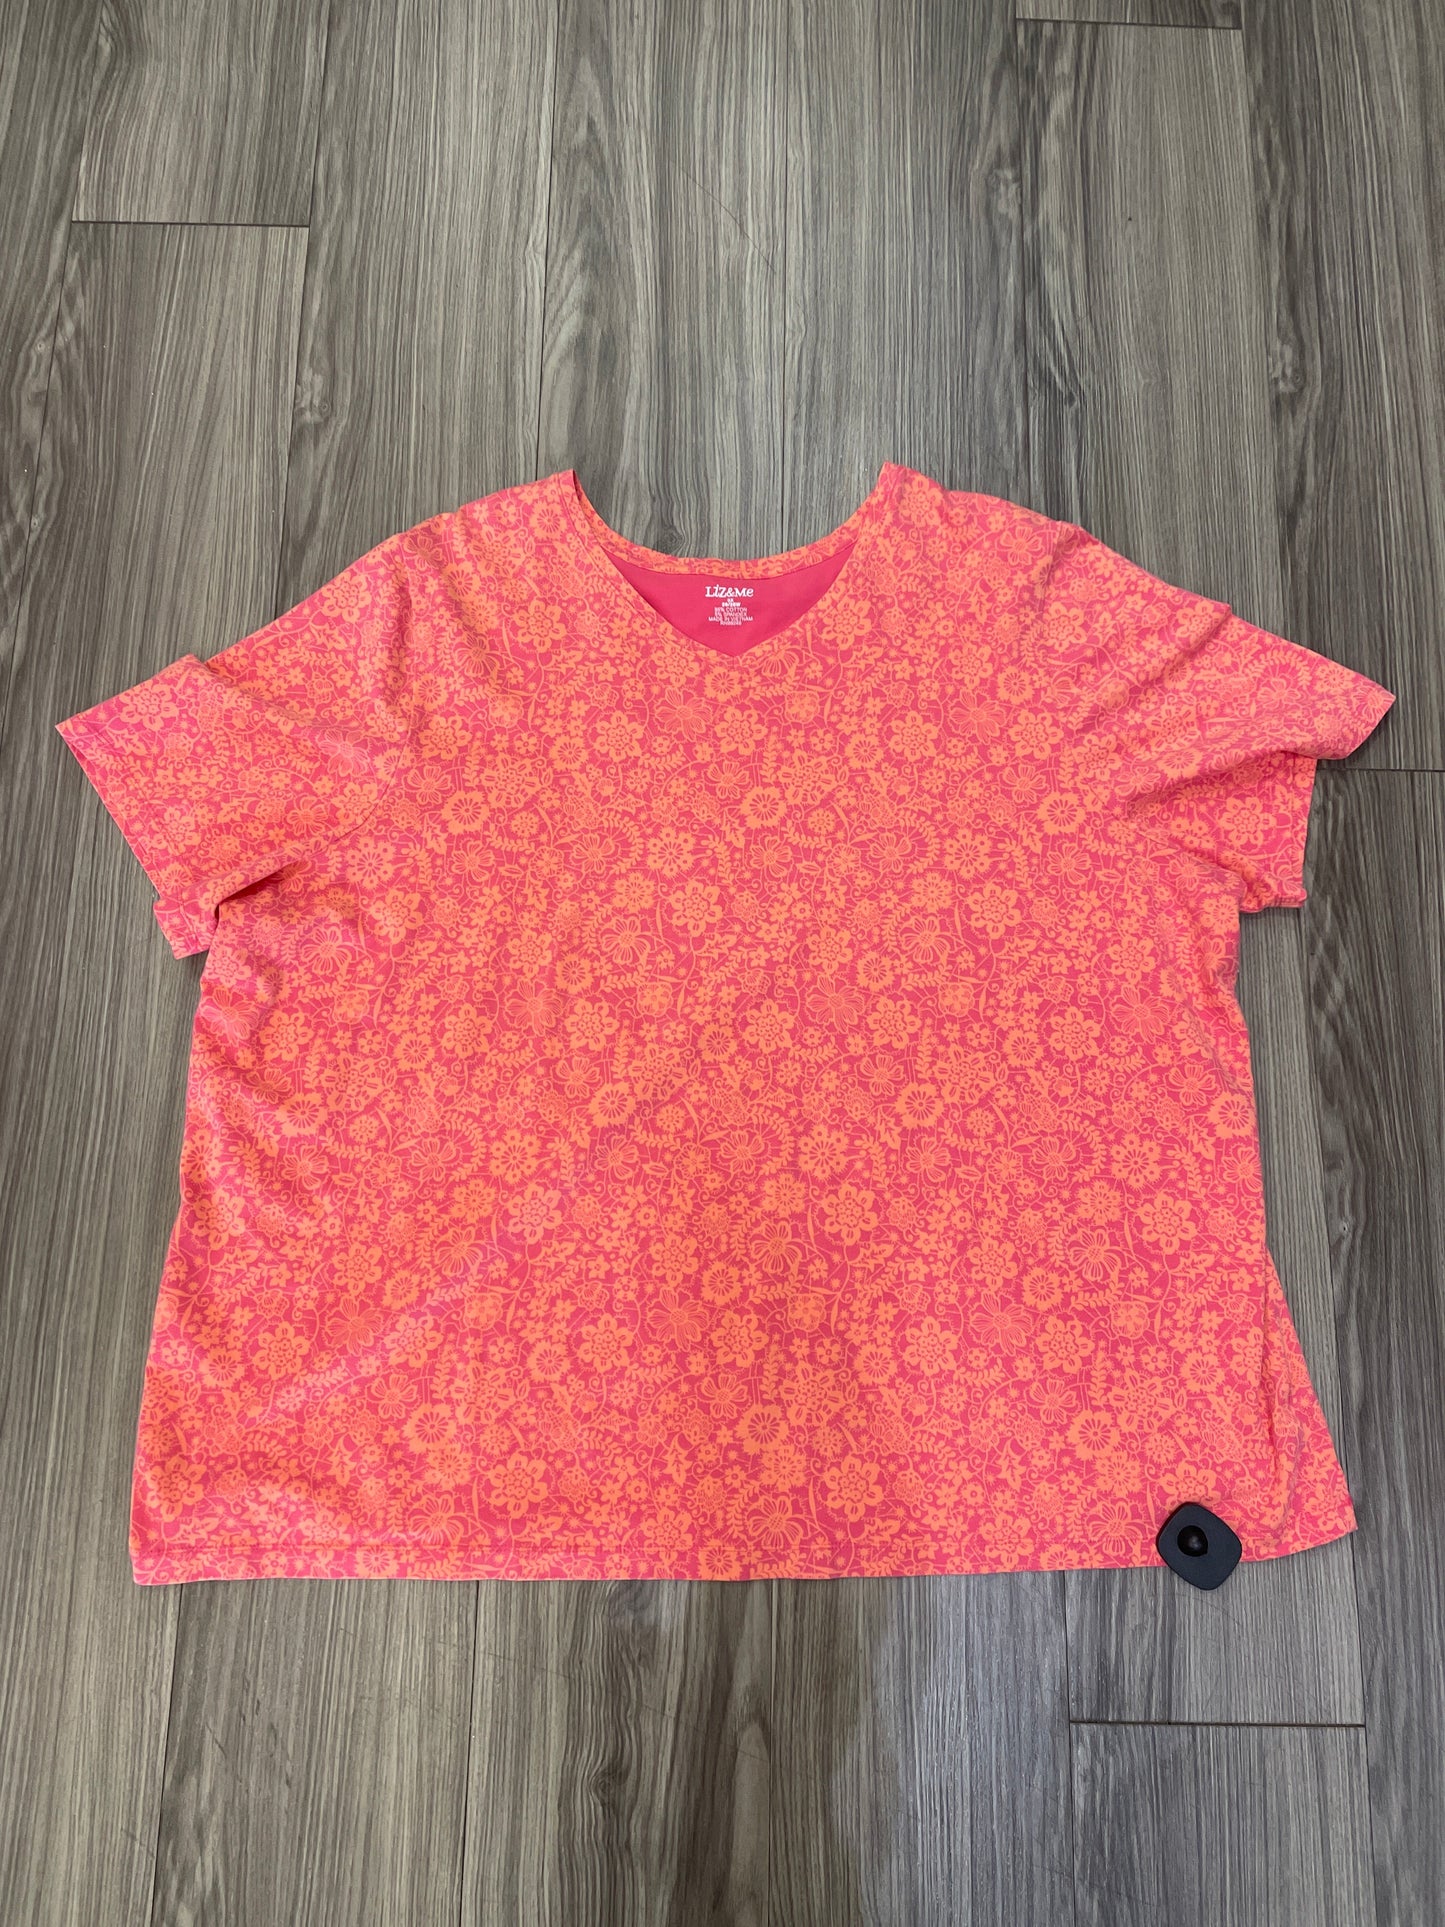 Coral Top Short Sleeve Liz And Me, Size 3x